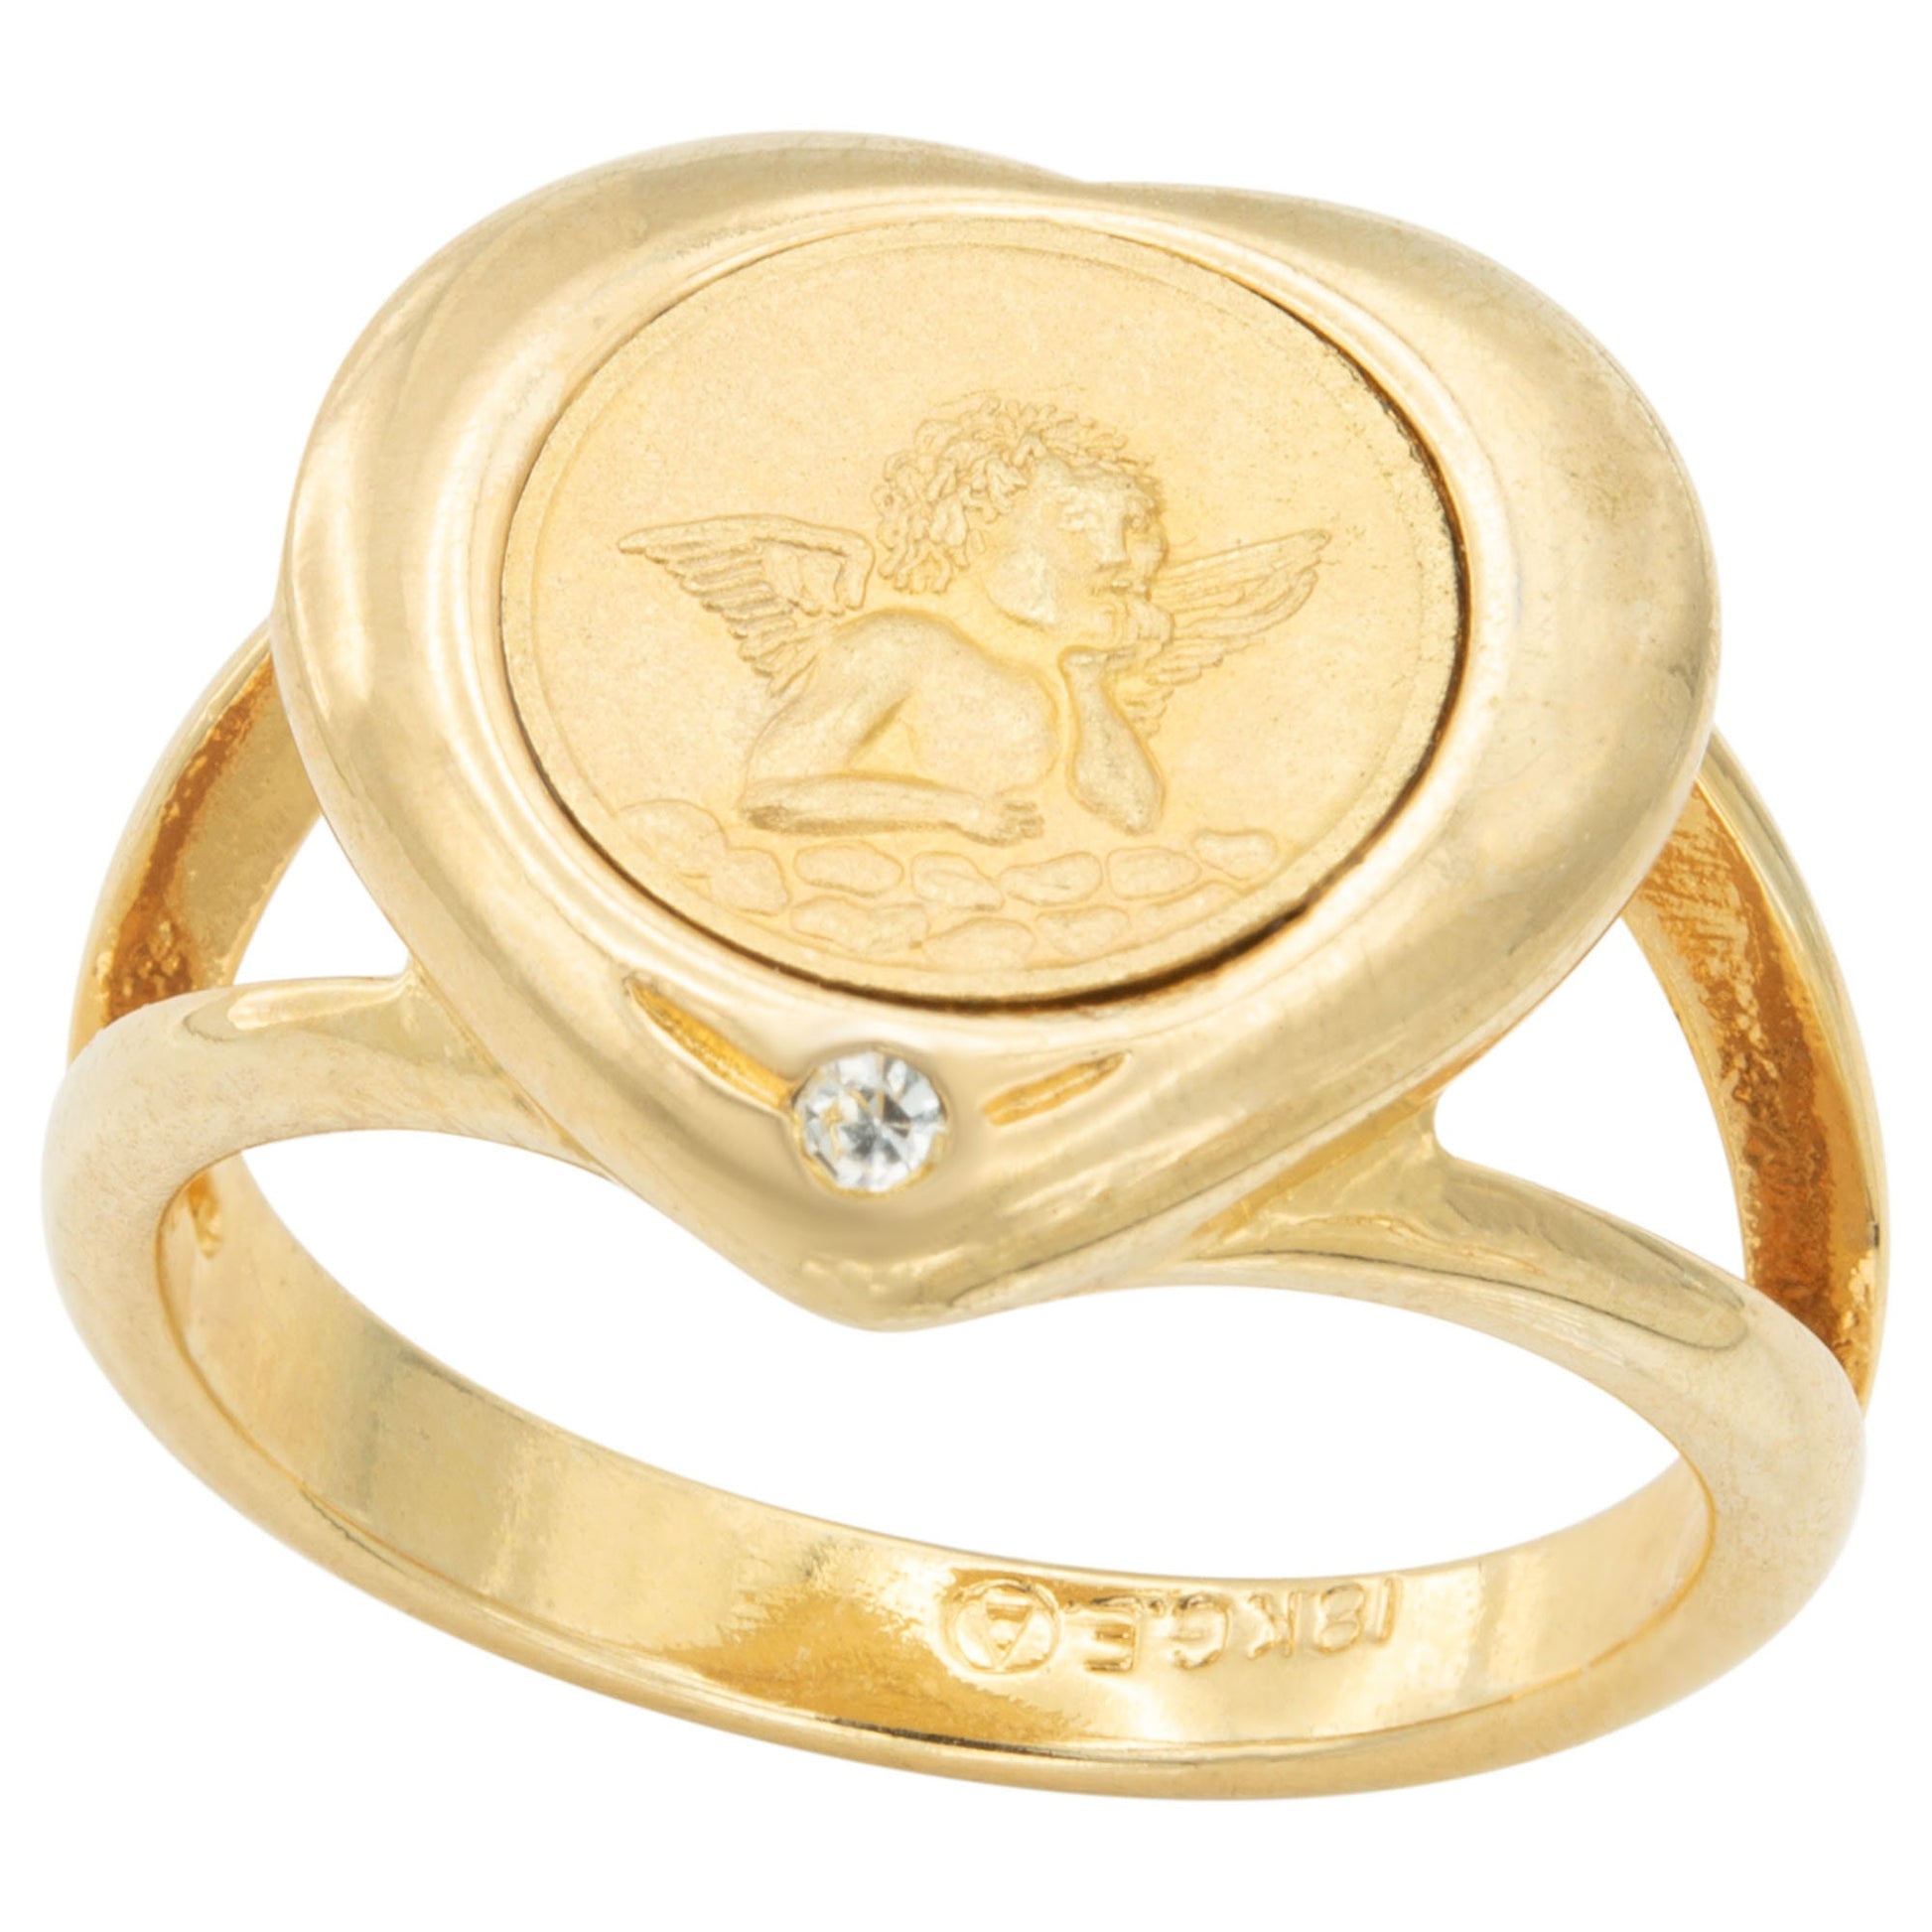 Vintage Heart Shaped Angel Coin Ring 18k Gold Electroplated with Diamond Chip Handcrafted Made in USA  #R3255-G